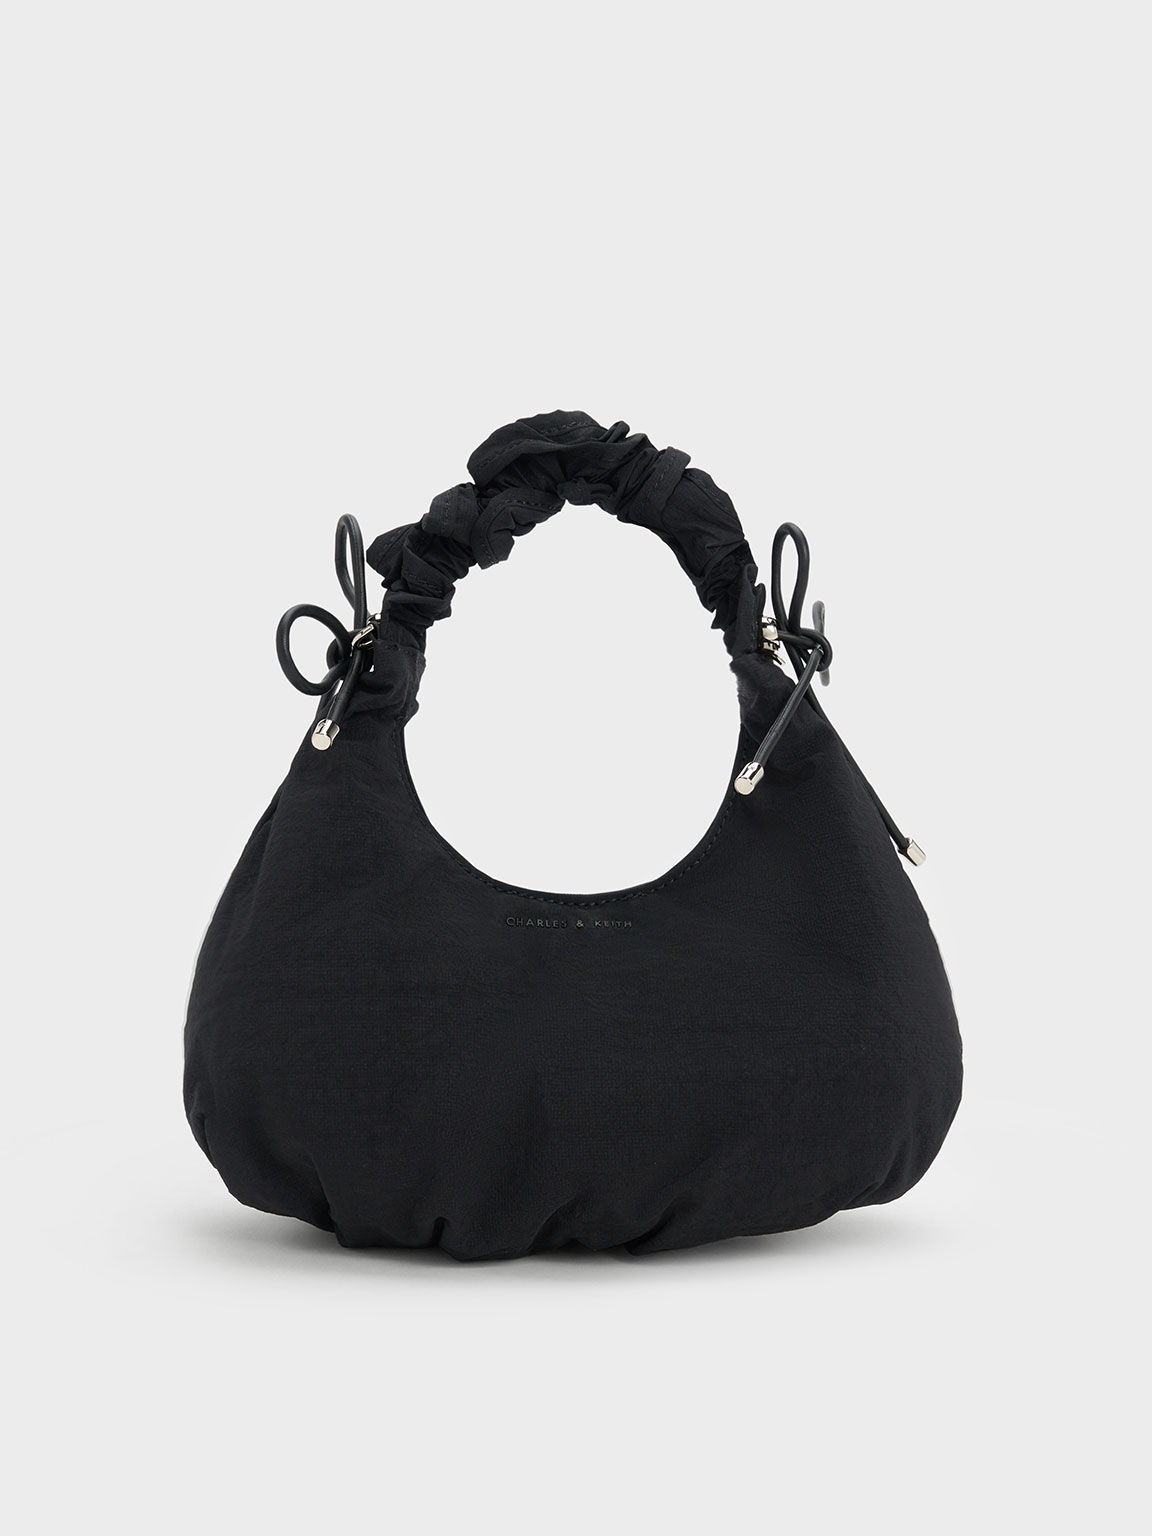 CHARLES & KEITH Heart-shaped crossbody bag in black as seen on